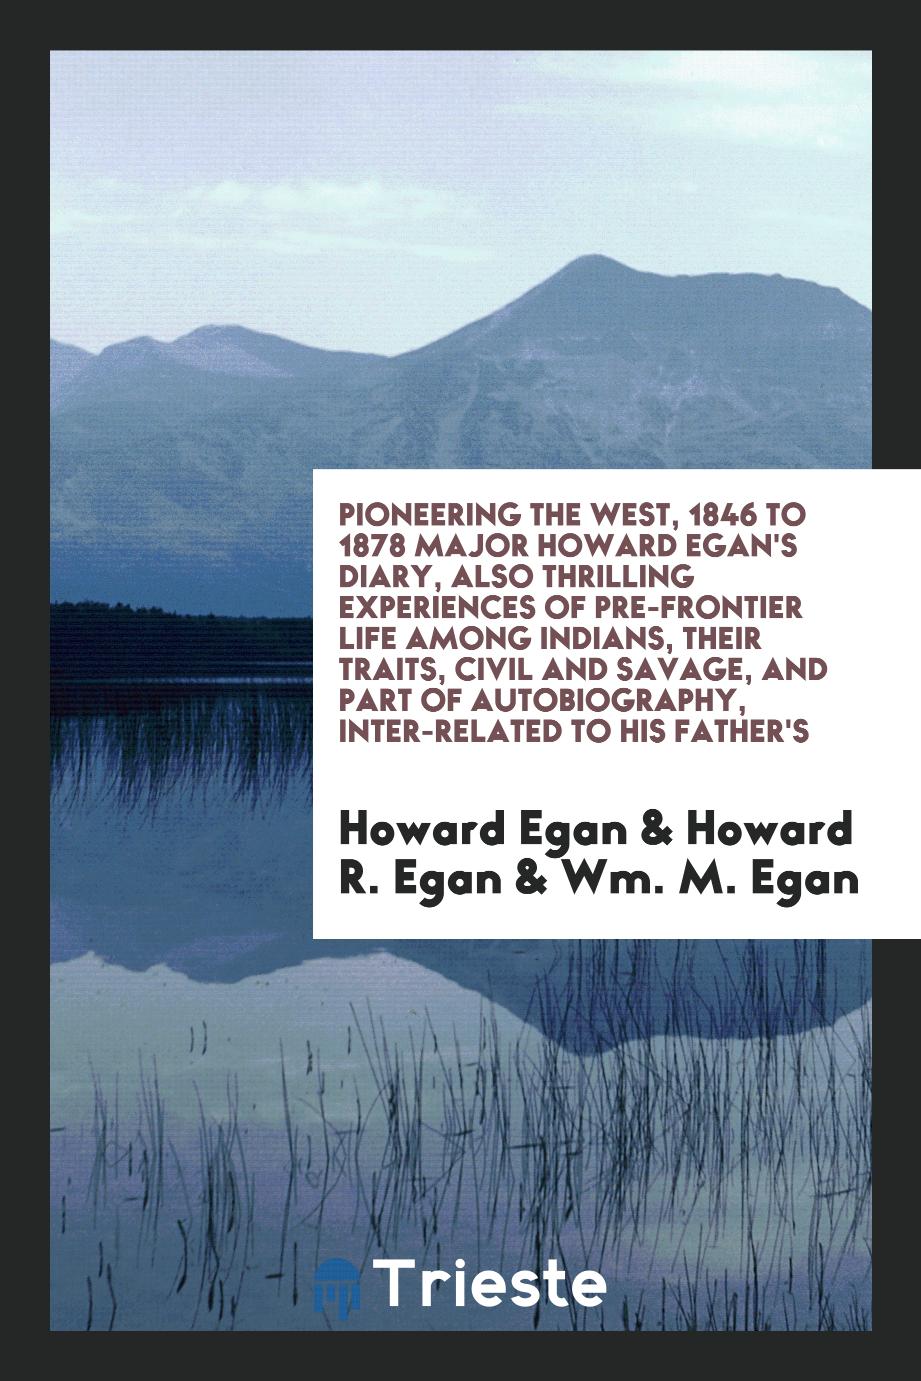 Pioneering the West, 1846 to 1878 Major Howard Egan's Diary, Also Thrilling Experiences of Pre-Frontier Life Among Indians, Their Traits, Civil and Savage, and Part of Autobiography, Inter-Related to His Father's